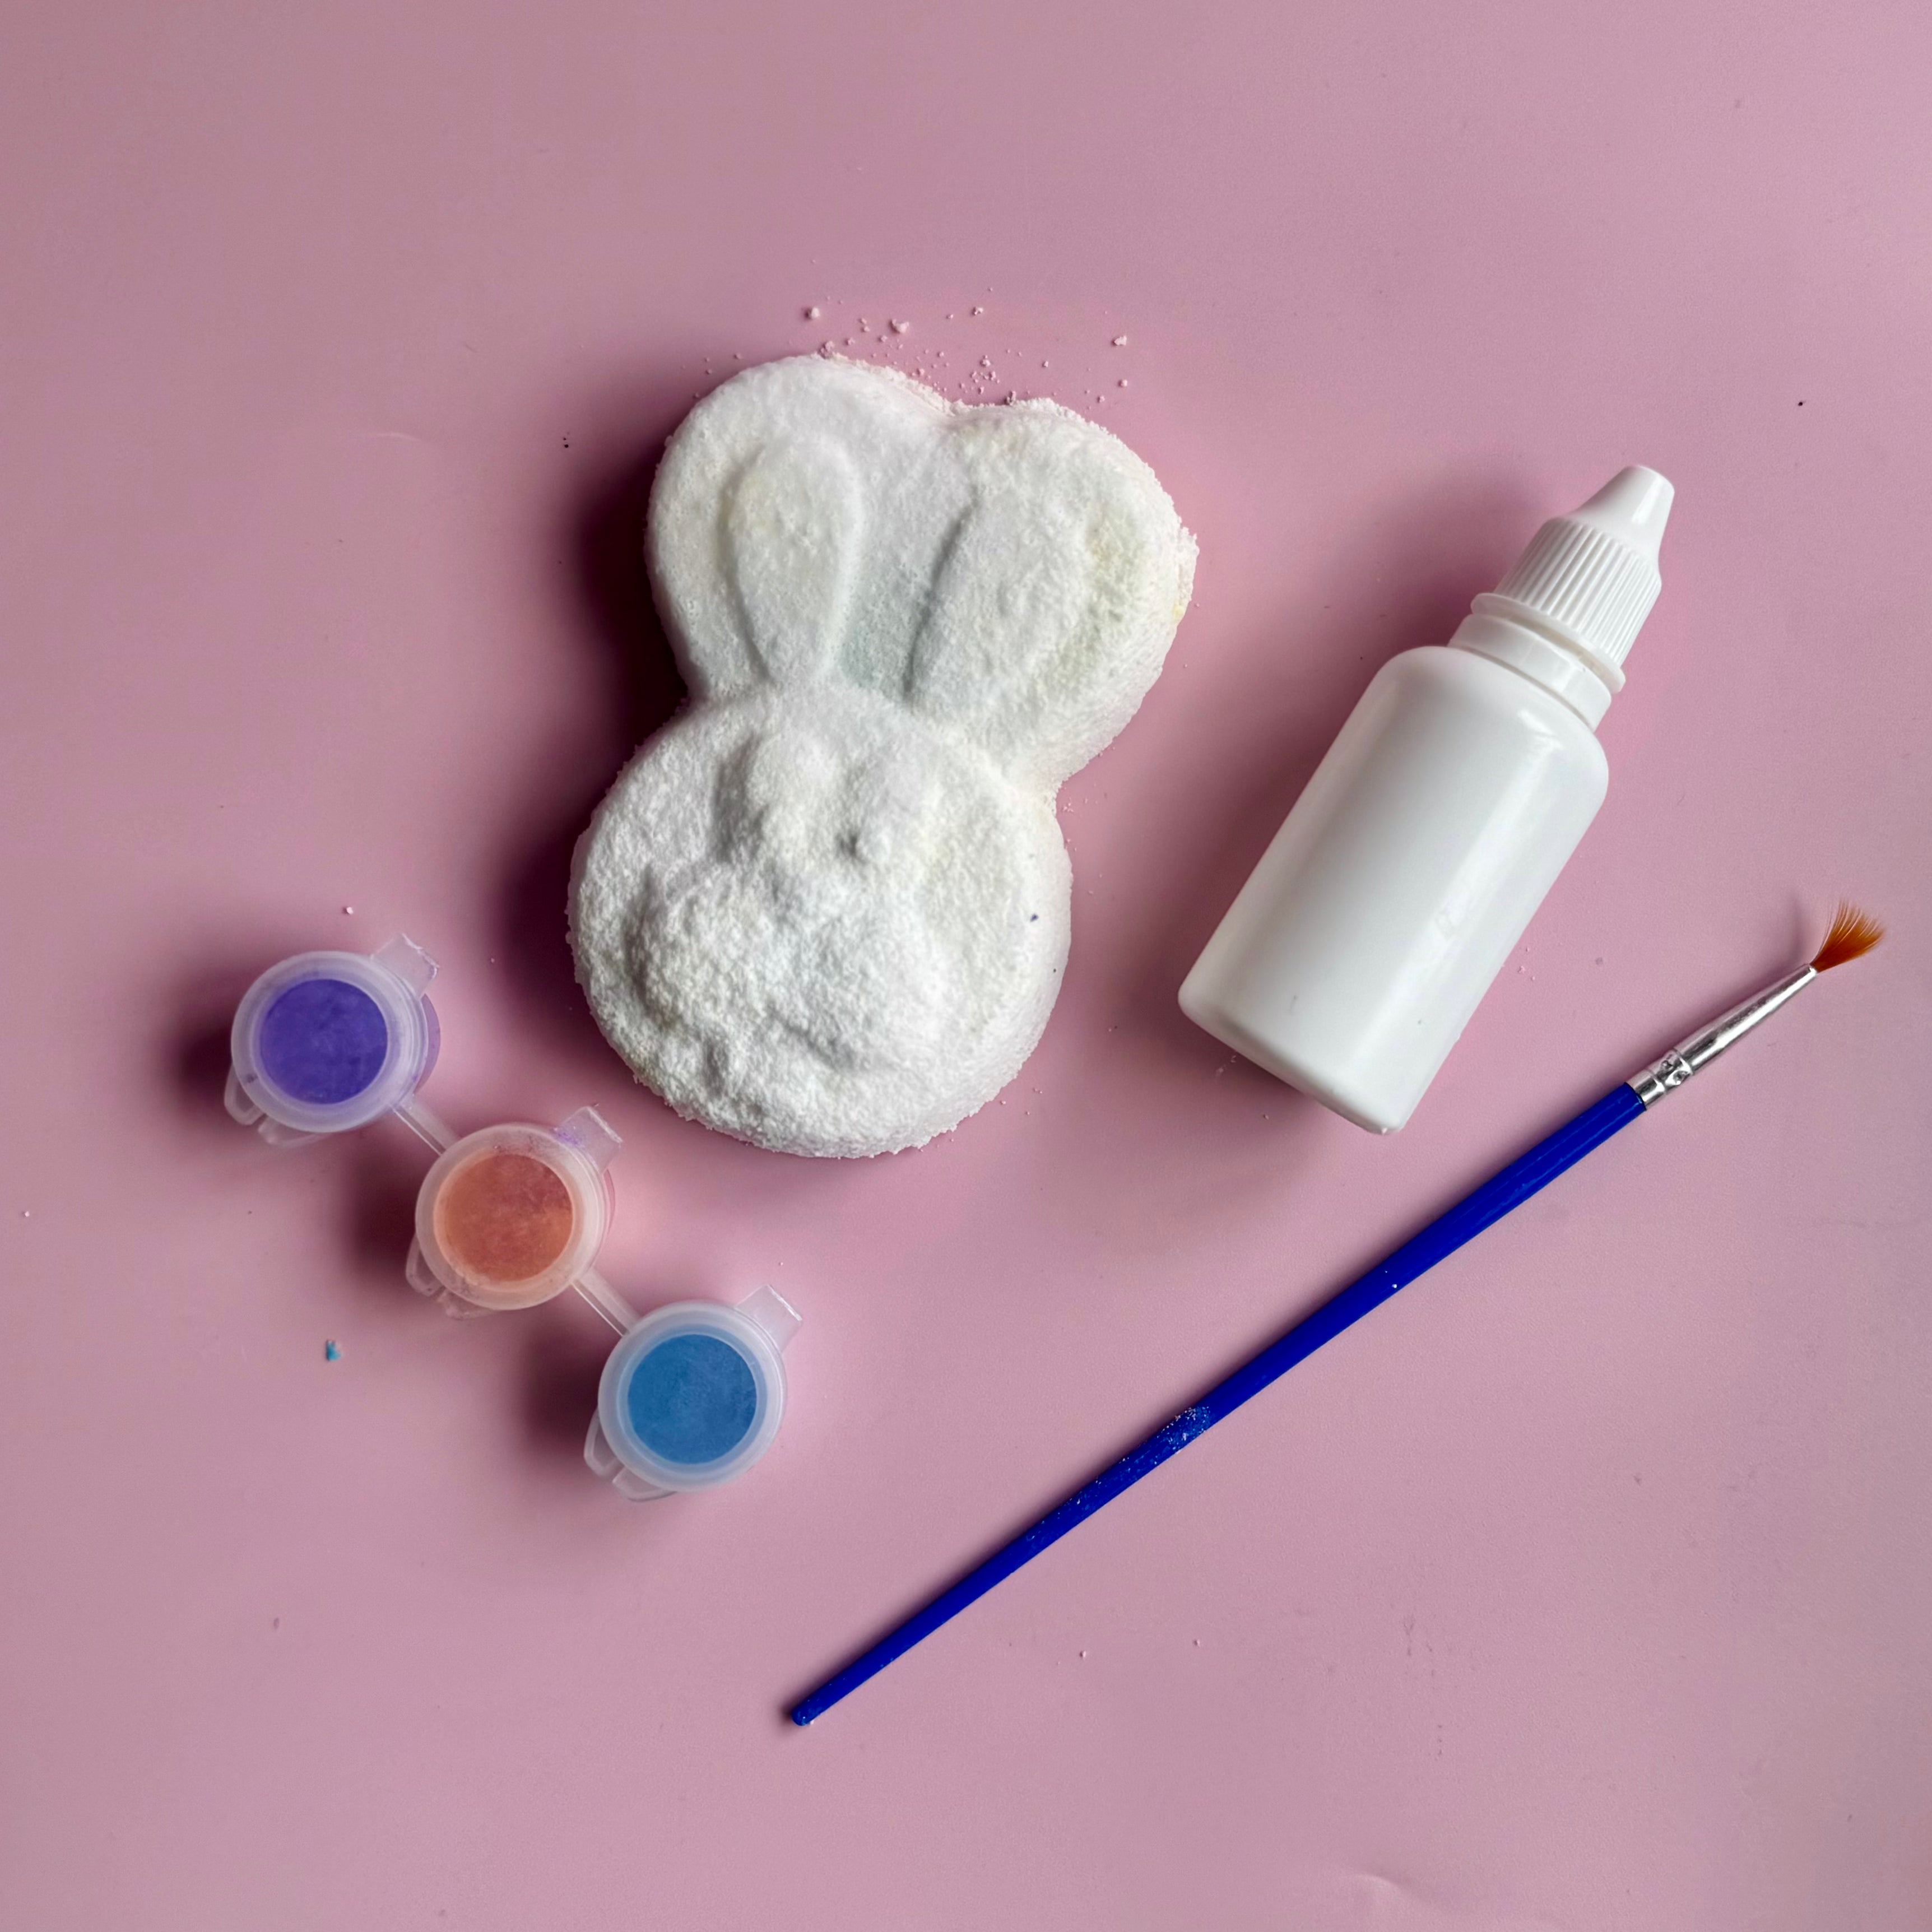 PAINT YOUR OWN BATH BOMB - Glam Body